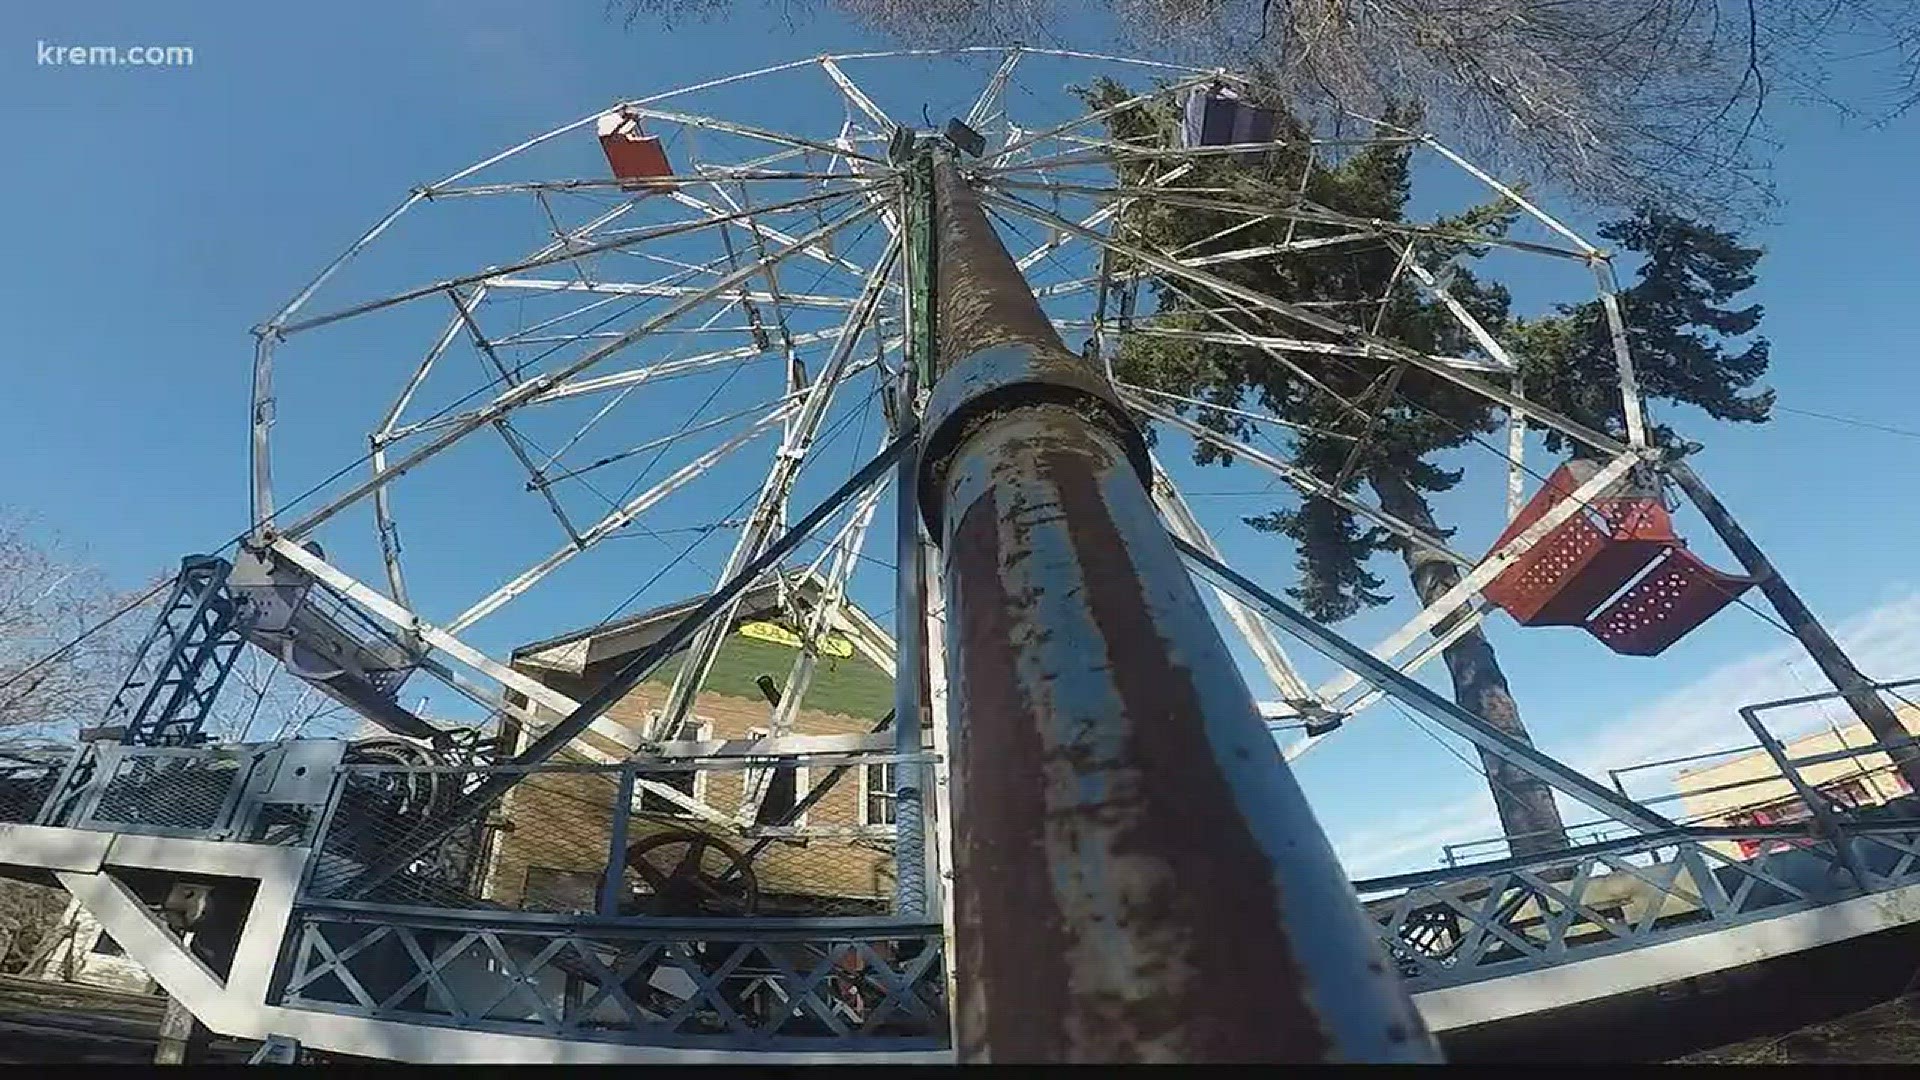 The story on the Hillyard Ferris wheel (3-8-18)